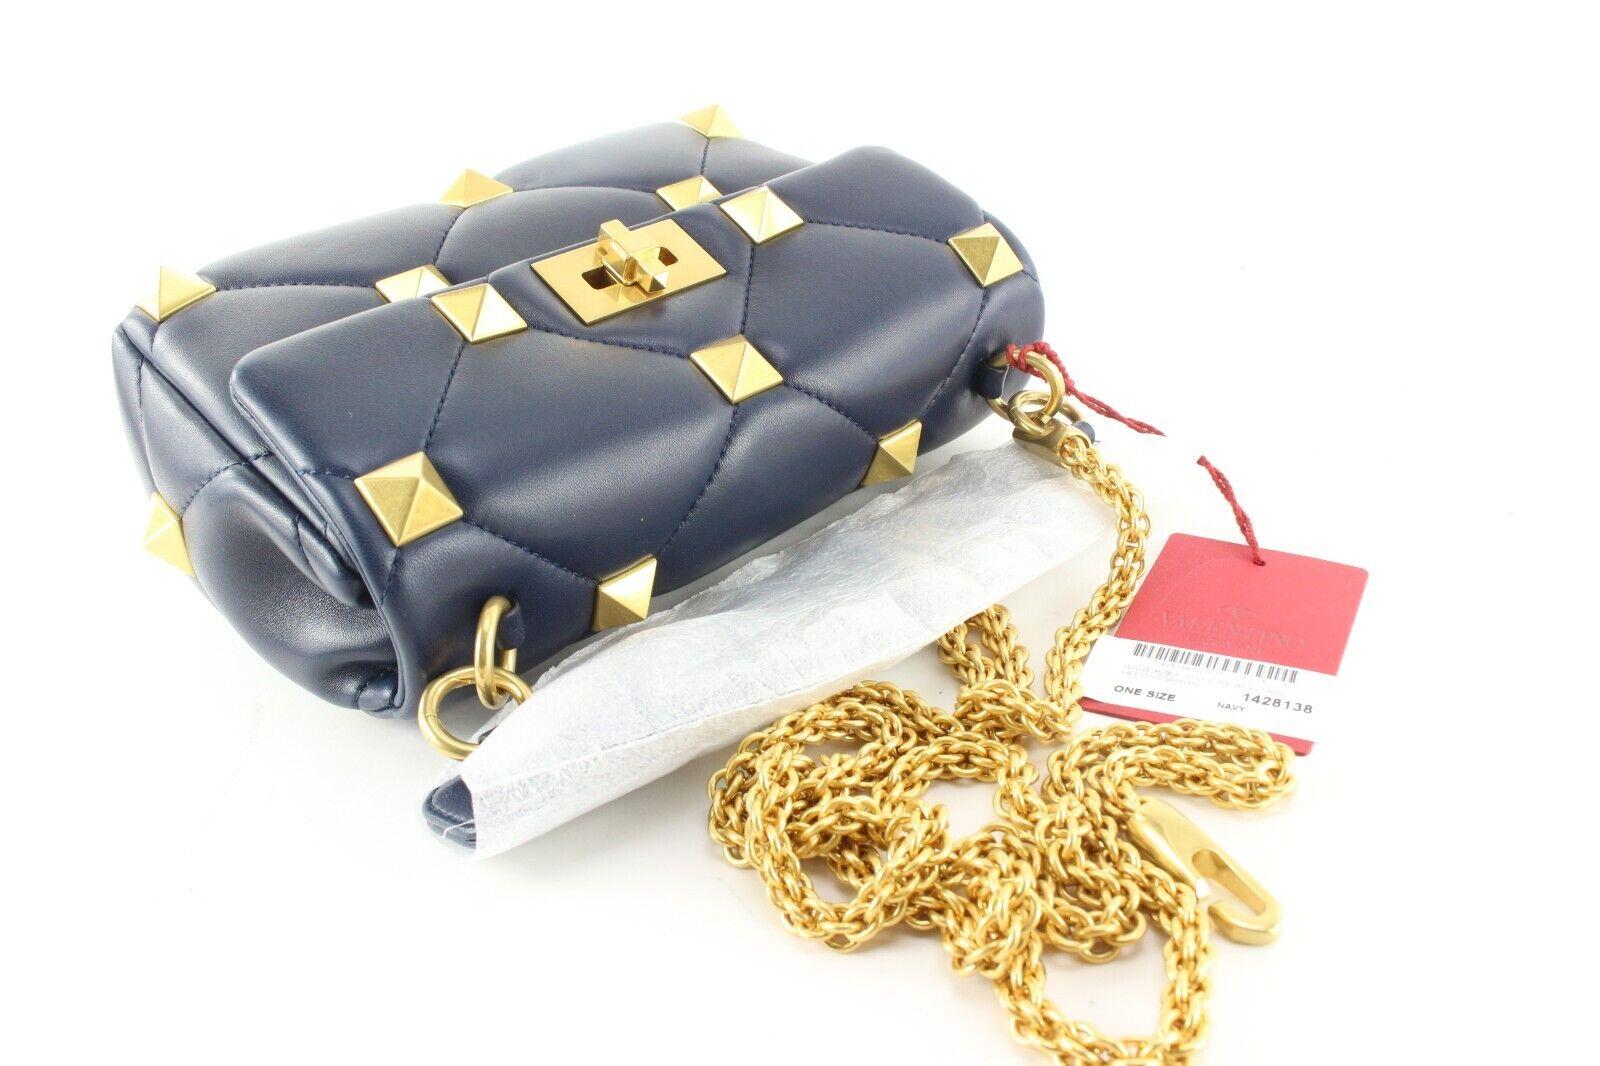 Valentino Navy Blue Quilted Roman Stud Crossbody GHW Chain 2VAL0407C In New Condition For Sale In Dix hills, NY